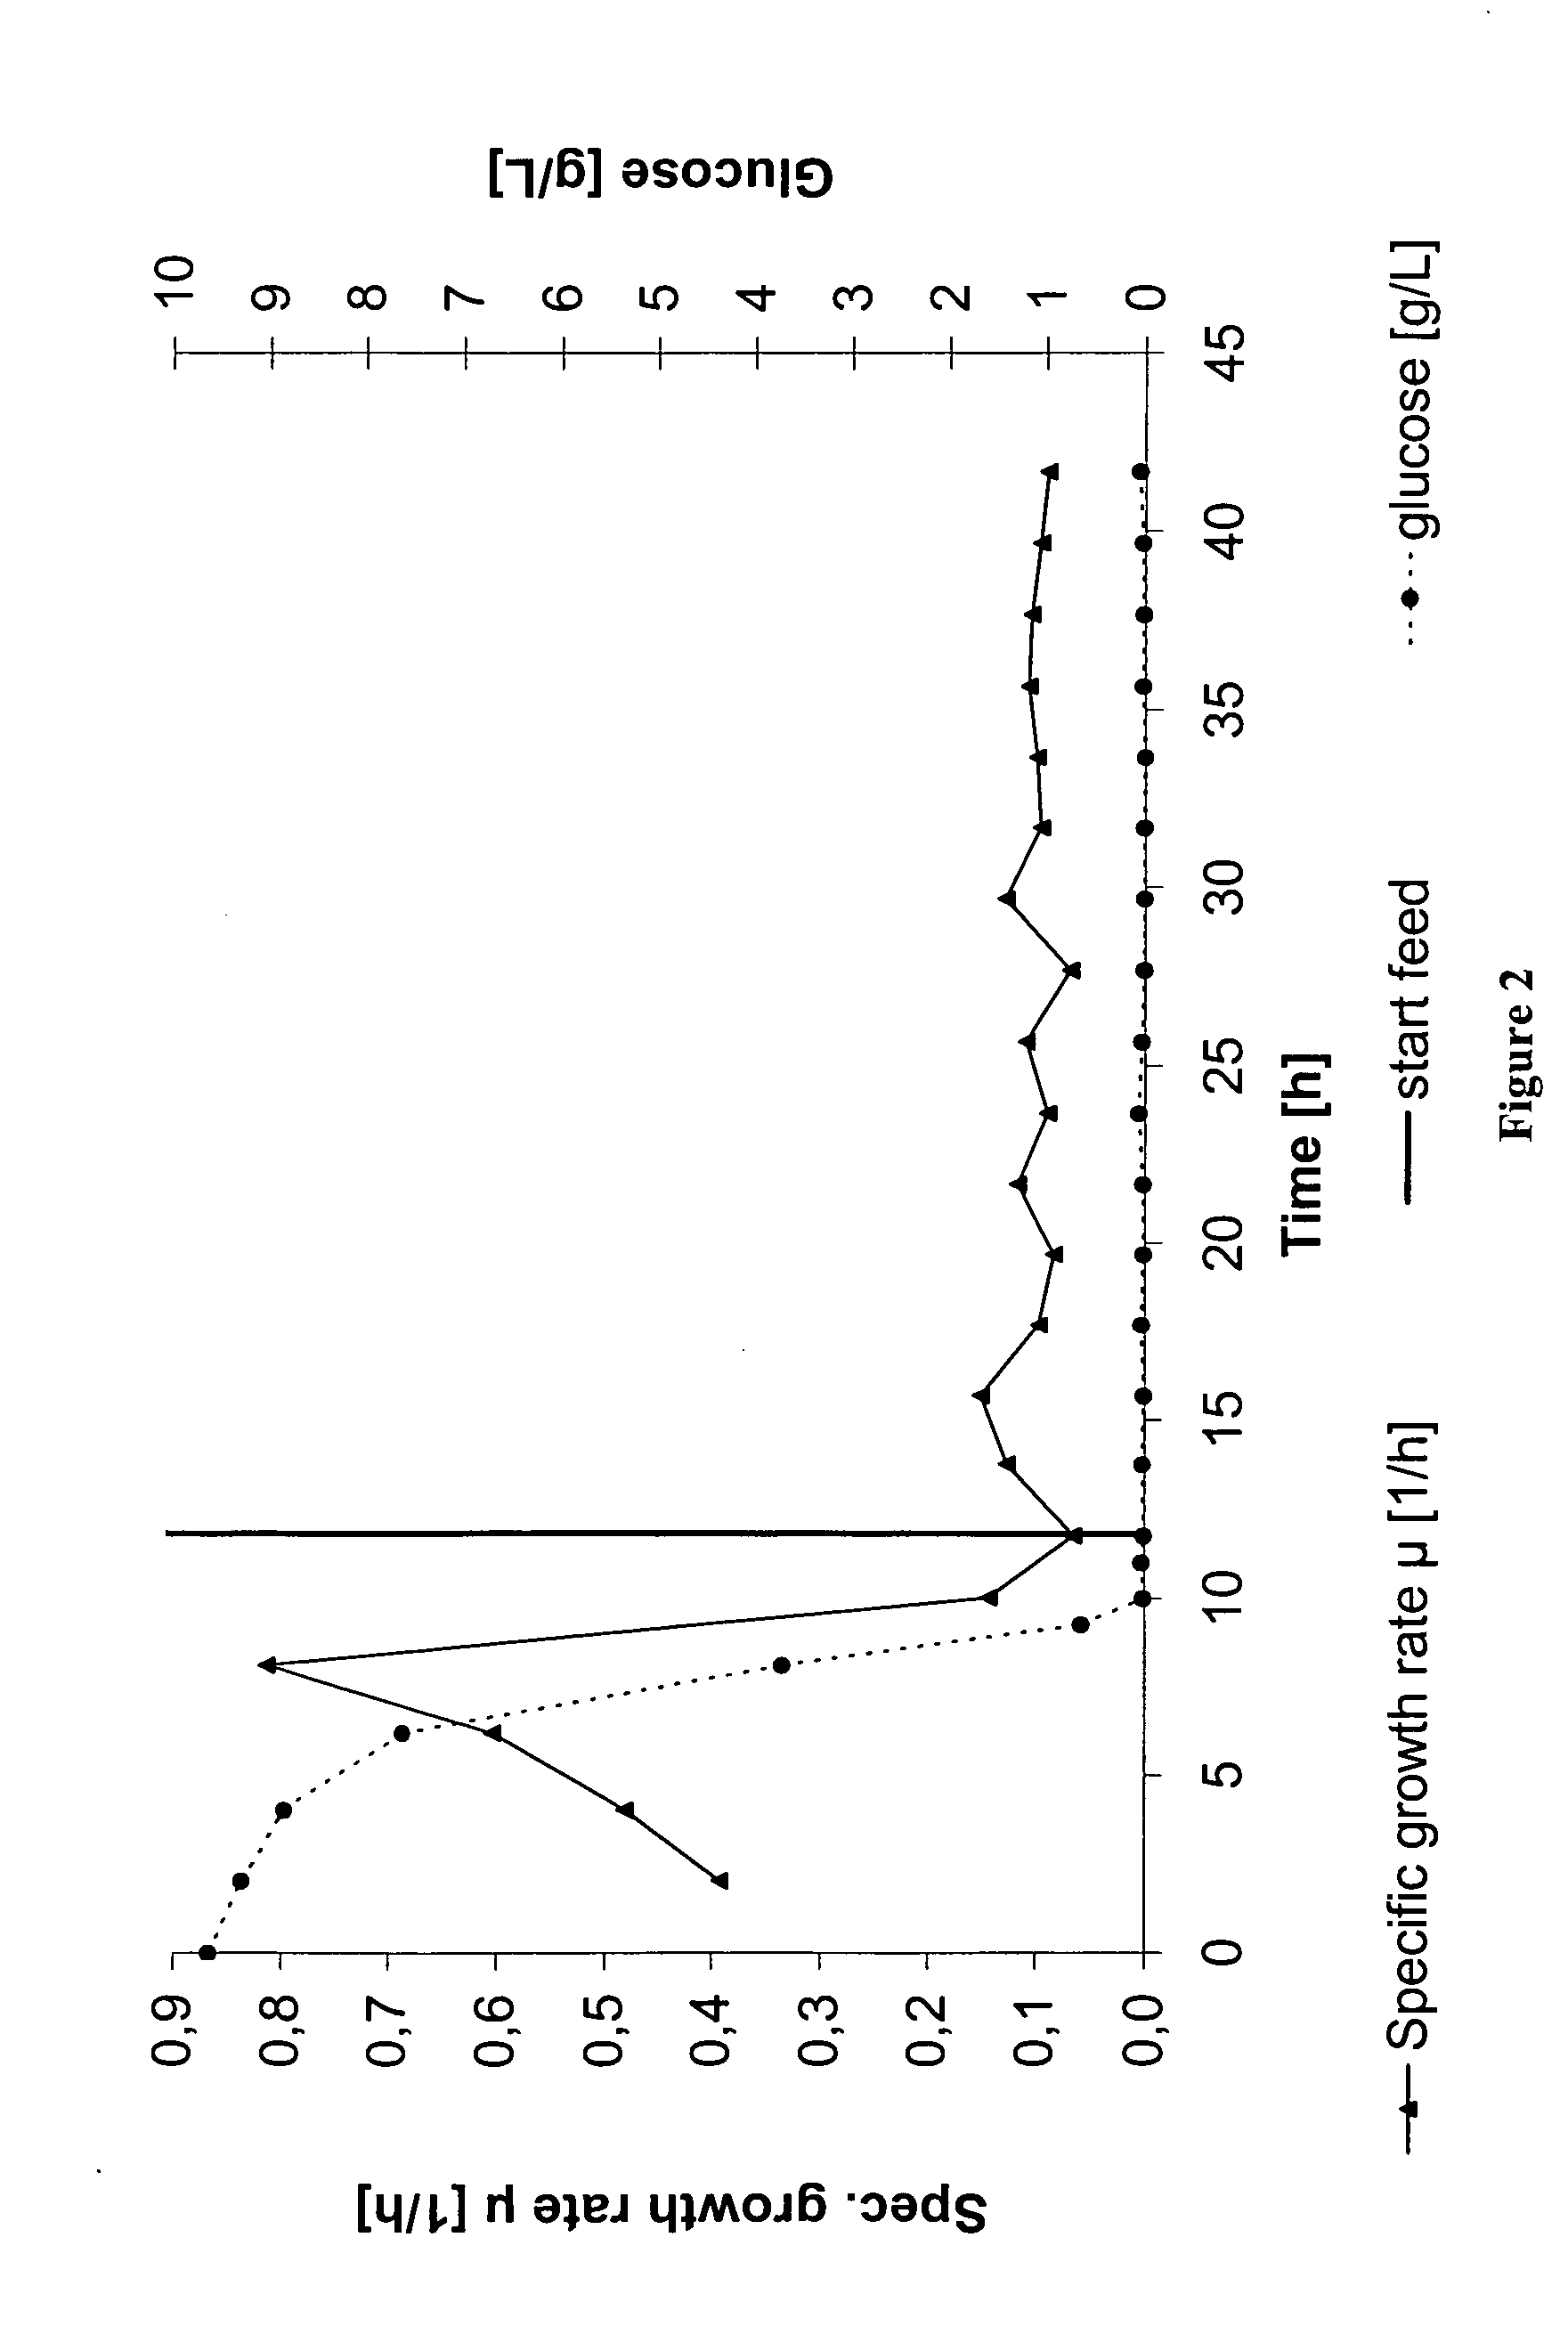 Fed-batch fermentation process and culture medium for the production of plasmid DNA in E. coli on a manufacturing scale